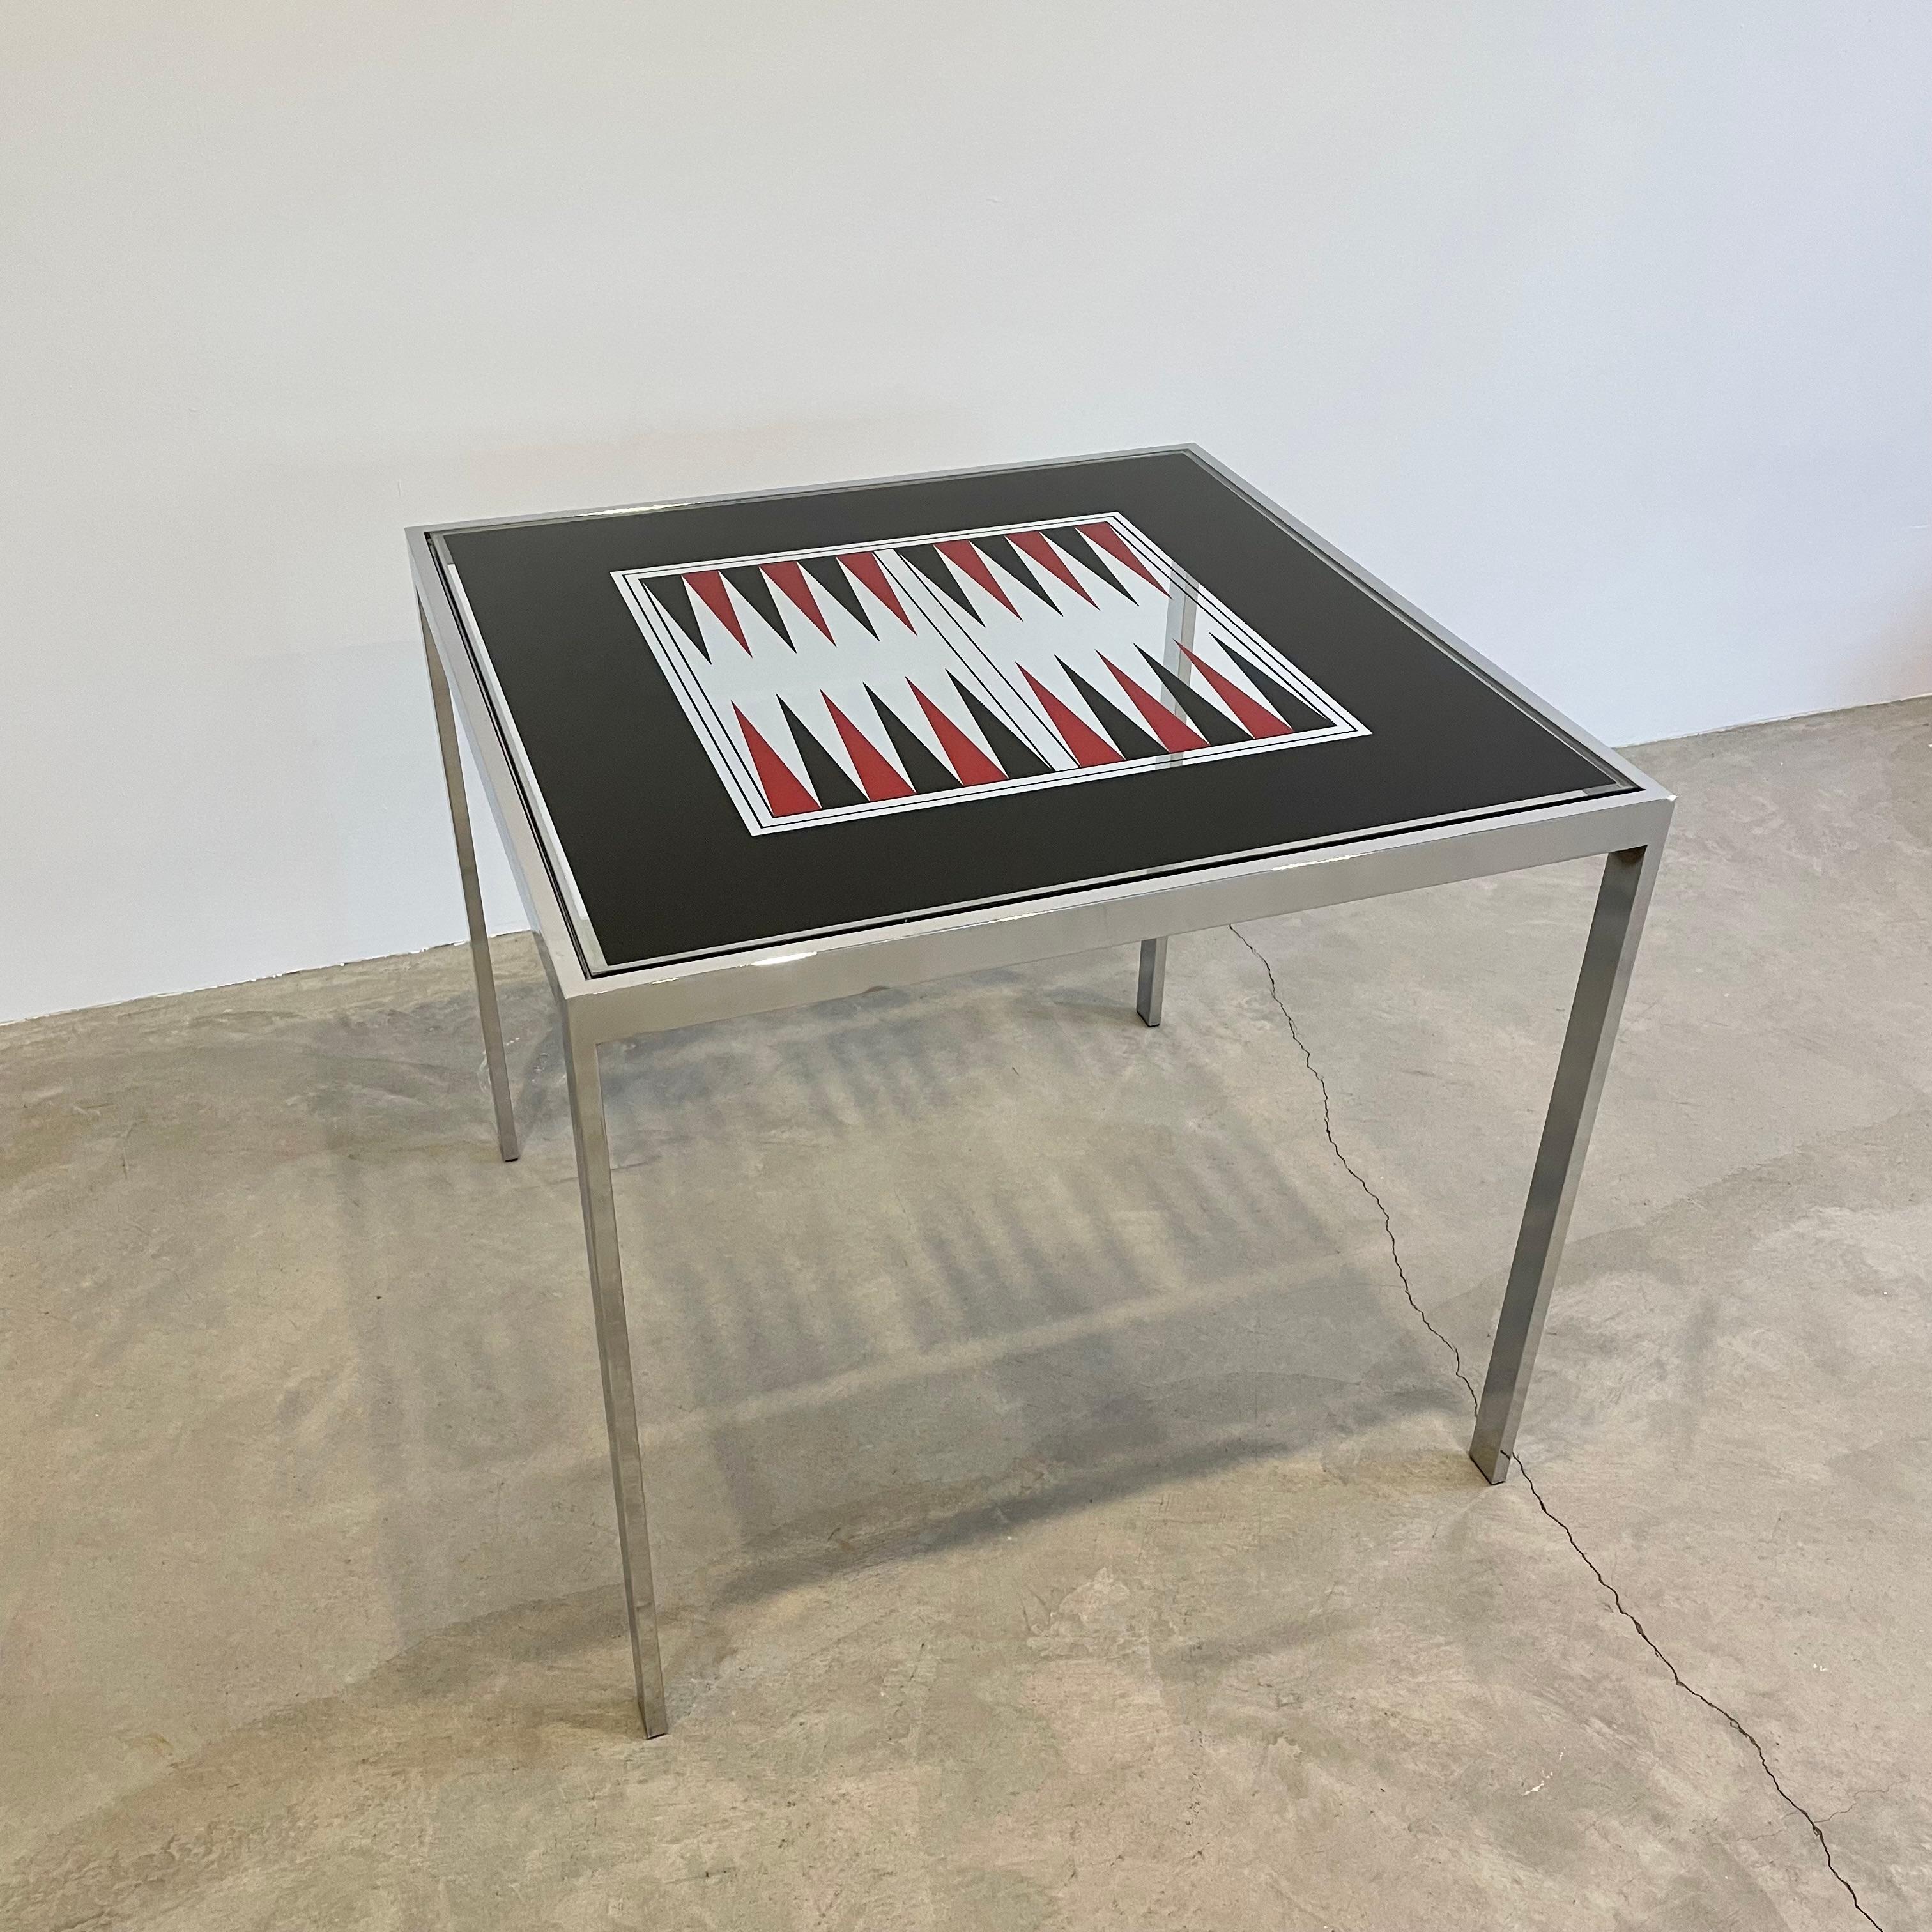 Chic Maison Jansen chromed steel and mirror glass backgammon games table, circa 1975. Sleek, minimalist design exudes immaculate craftsmanship. Gorgeous addition to any home interior or games room which would blend effortlessly within a myriad of